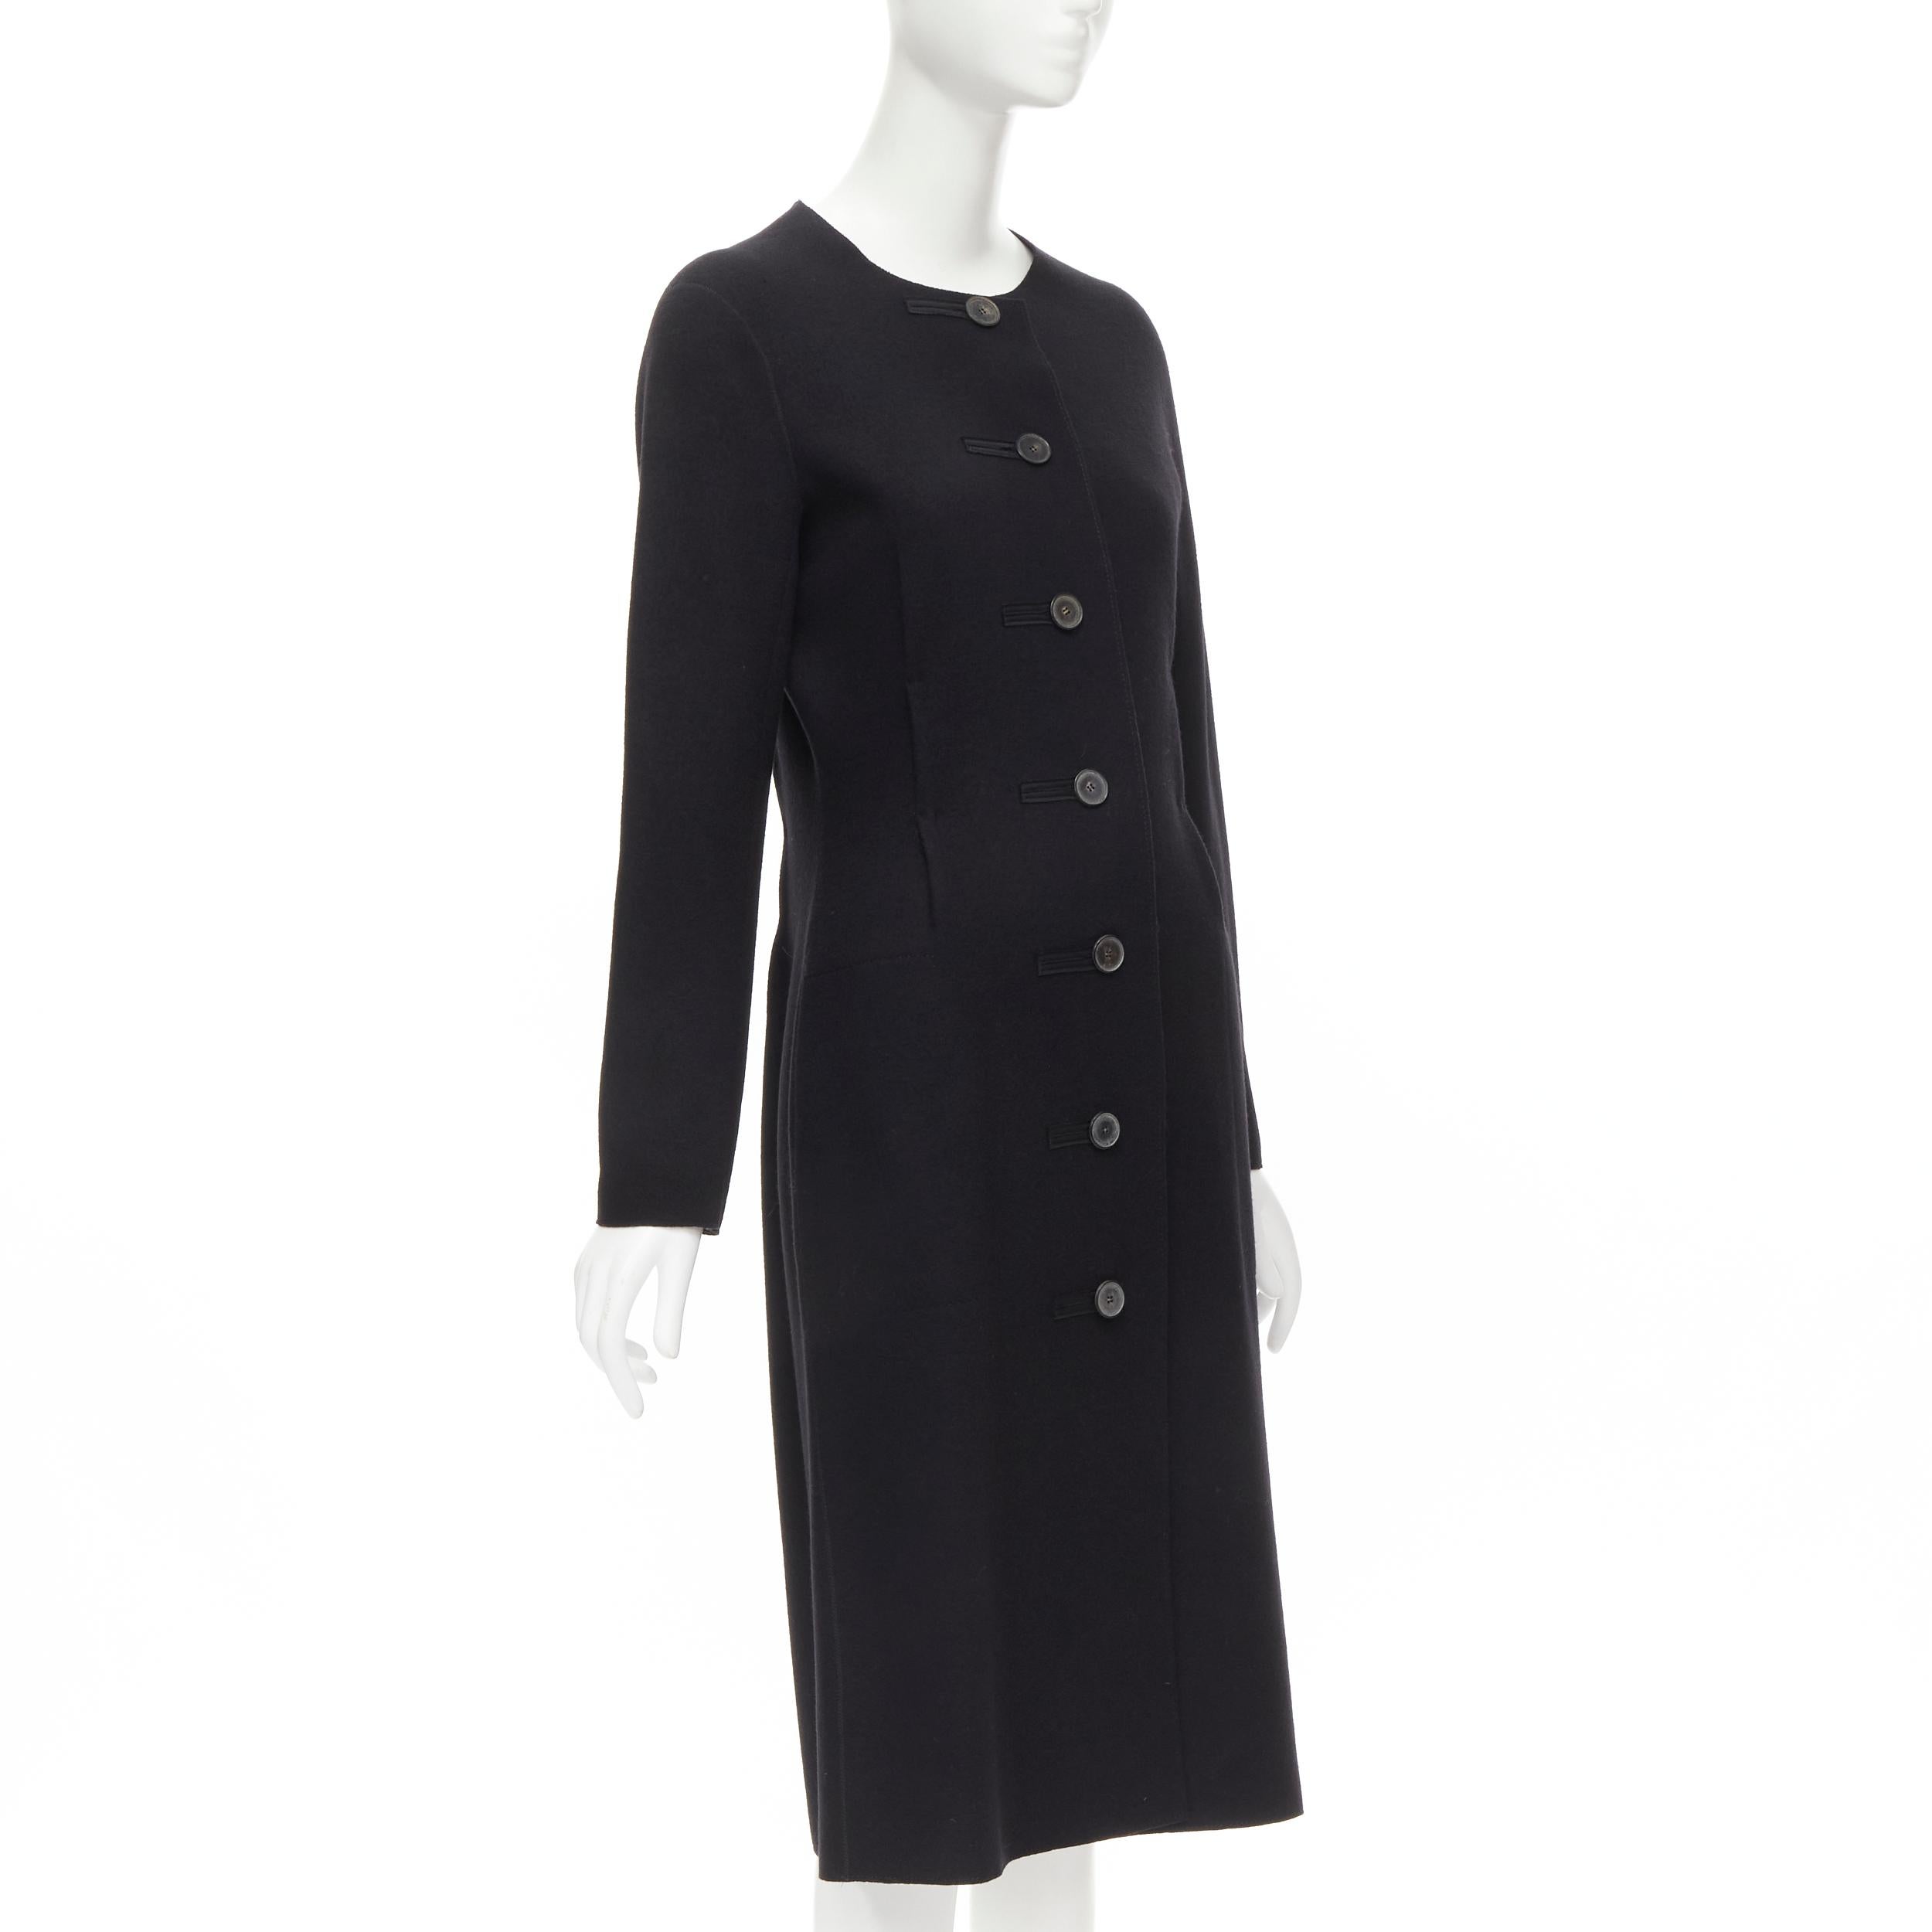 LANVIN Alber Elbaz 2004 black wool pinched darts button front fitted coat FR38 S In Excellent Condition For Sale In Hong Kong, NT